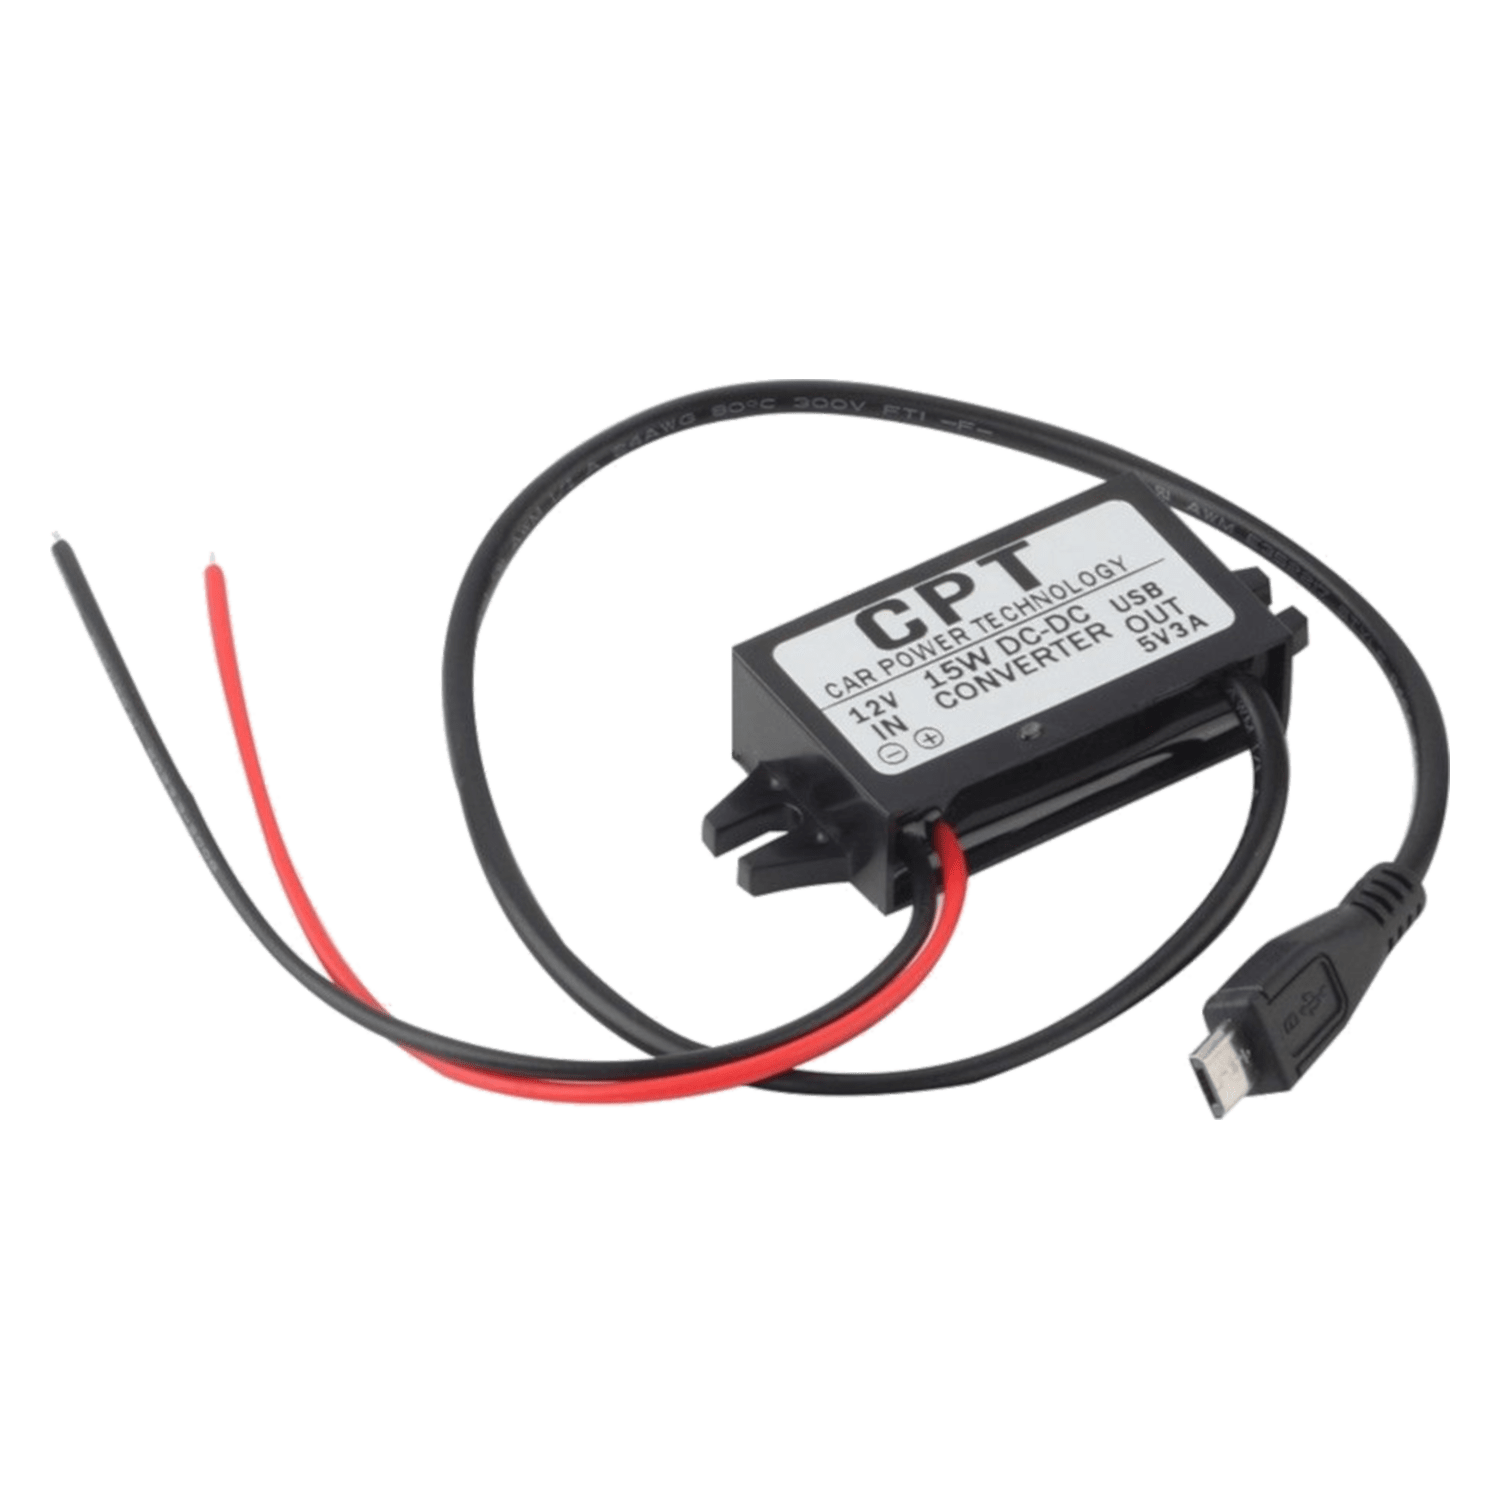 CPT-HUL-6 vehicle power supply 2A MAX single MicroUSB 5V output 